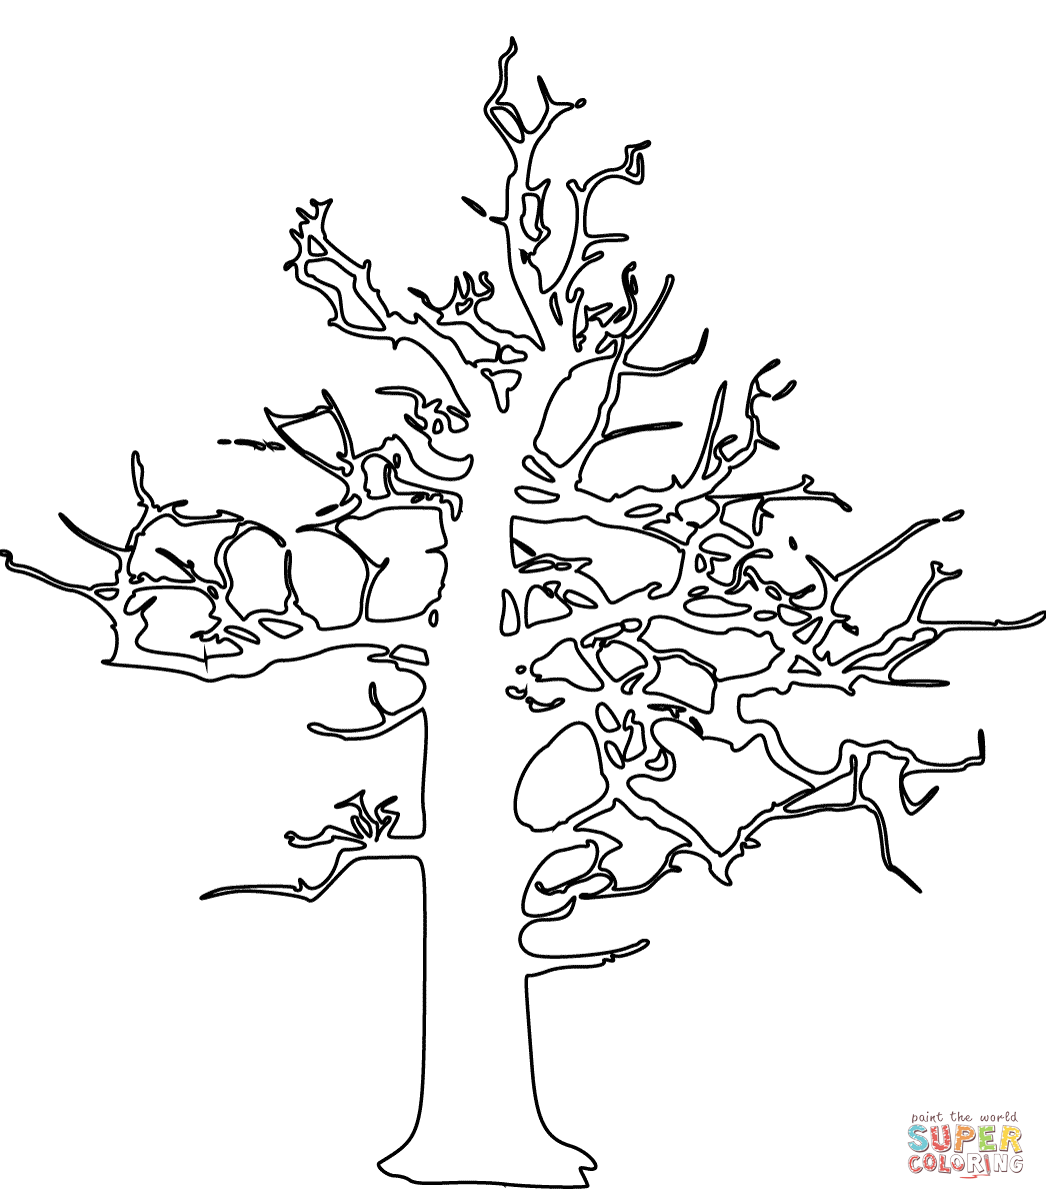 Dead Tree coloring #16, Download drawings